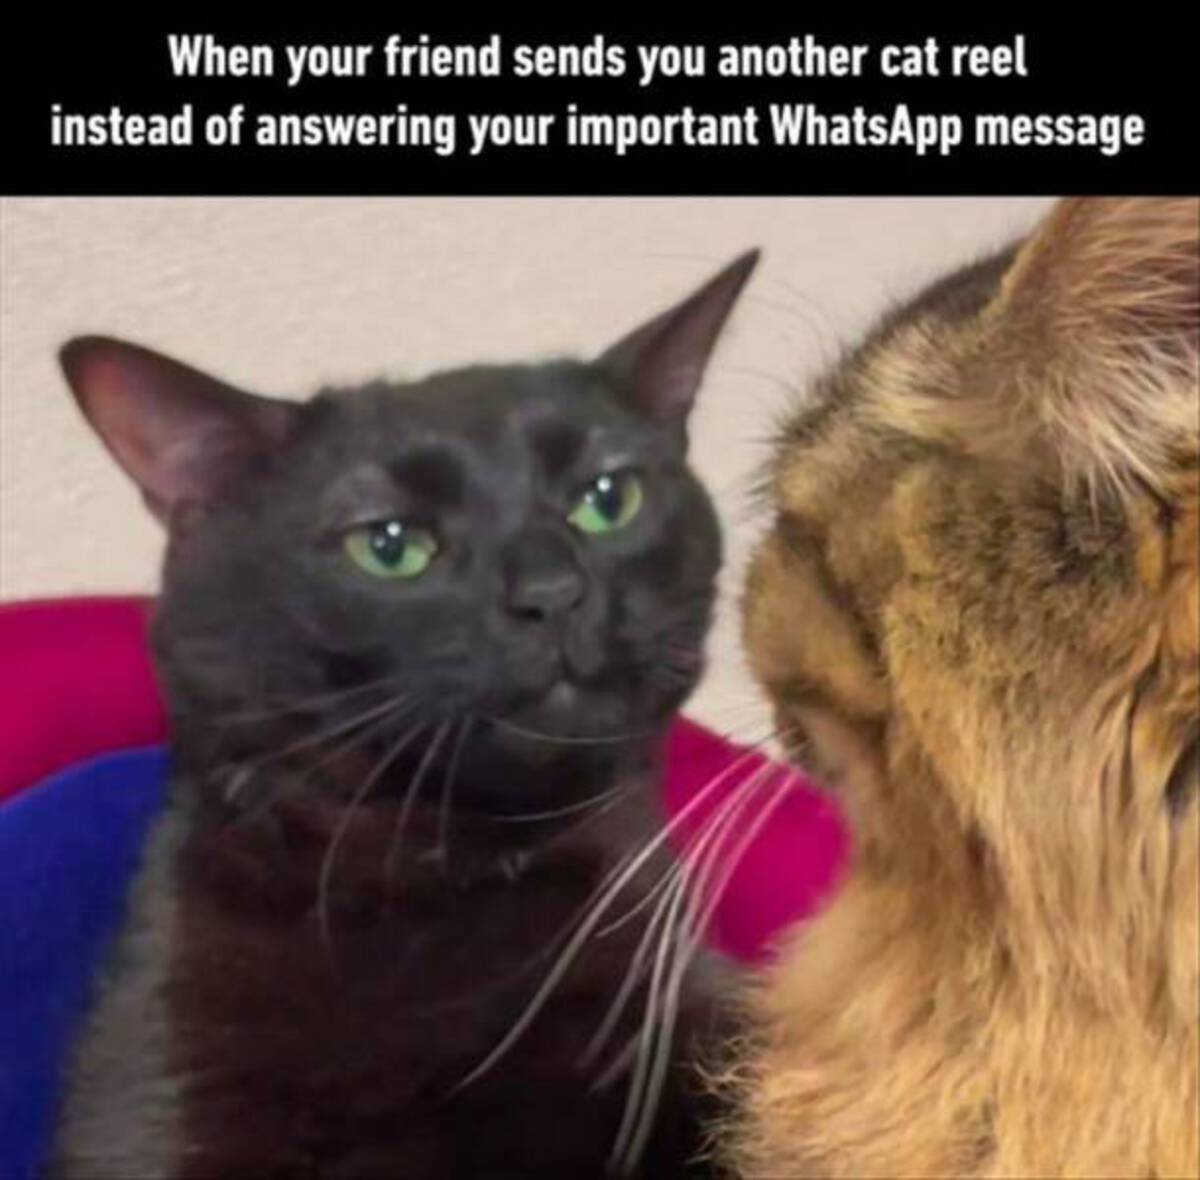 cat reels instagram - When your friend sends you another cat reel instead of answering your important WhatsApp message